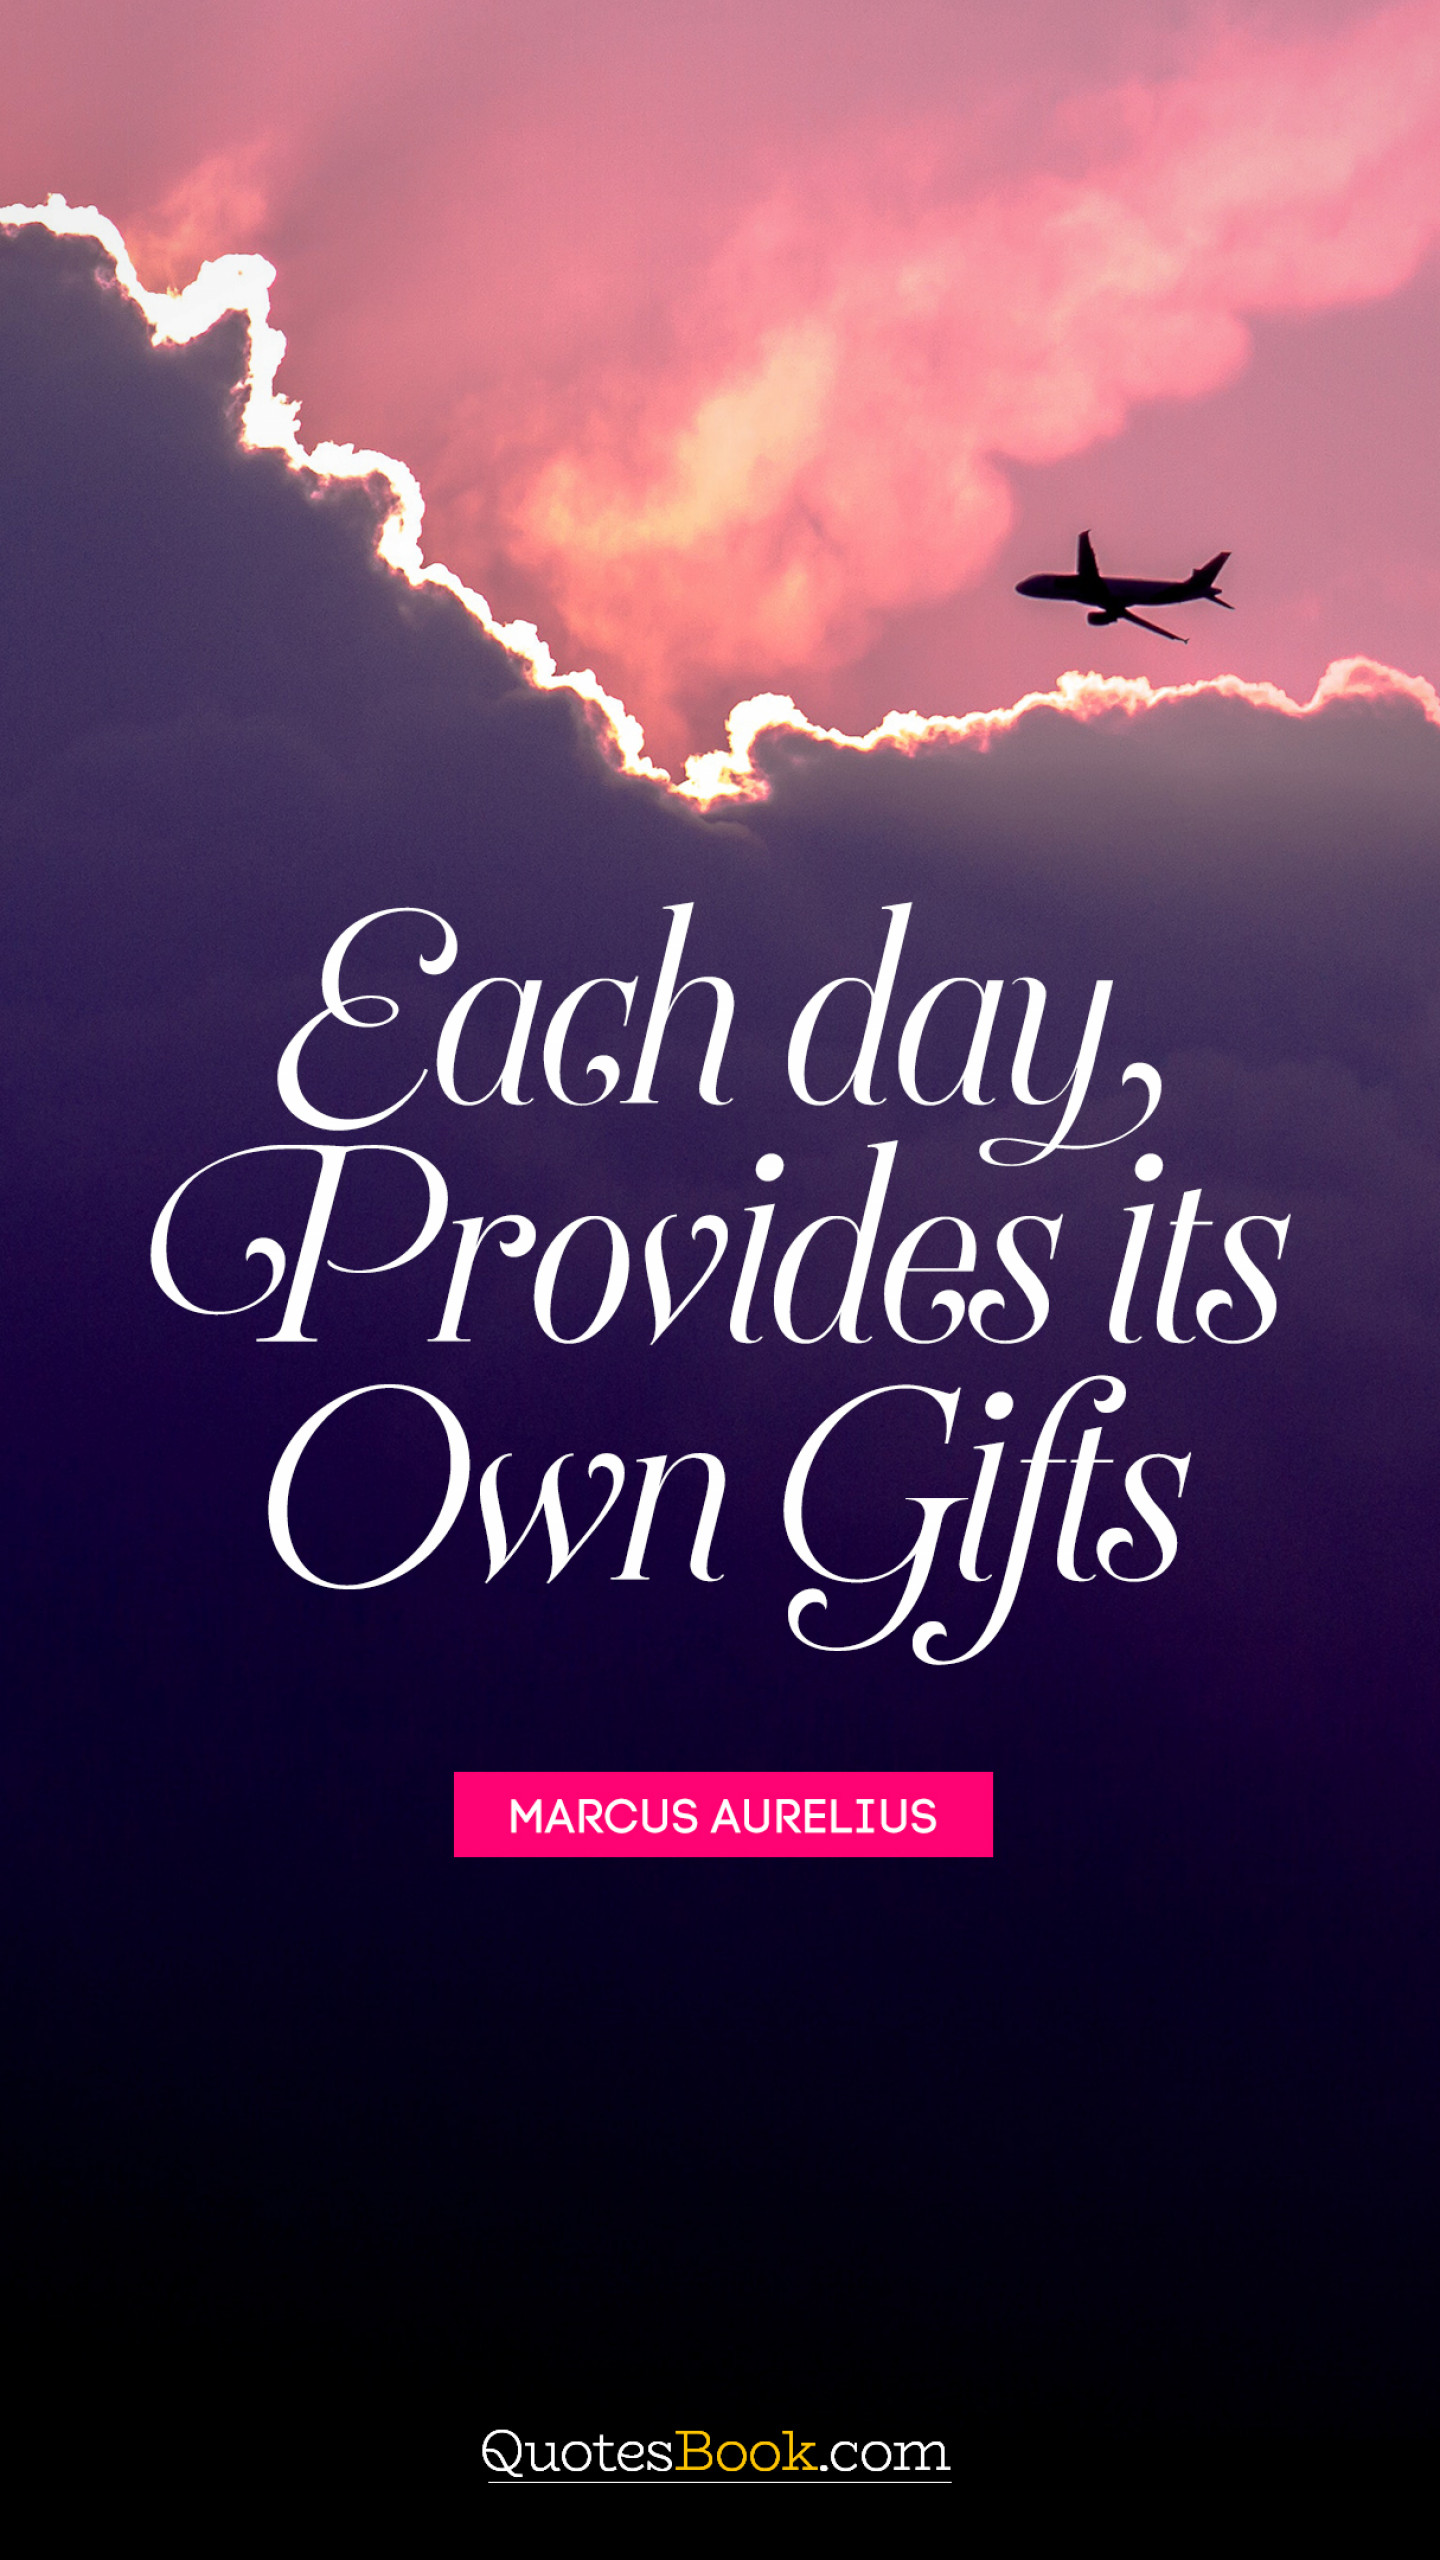 Each day provides its own gifts. - Quote by Marcus Aurelius - QuotesBook